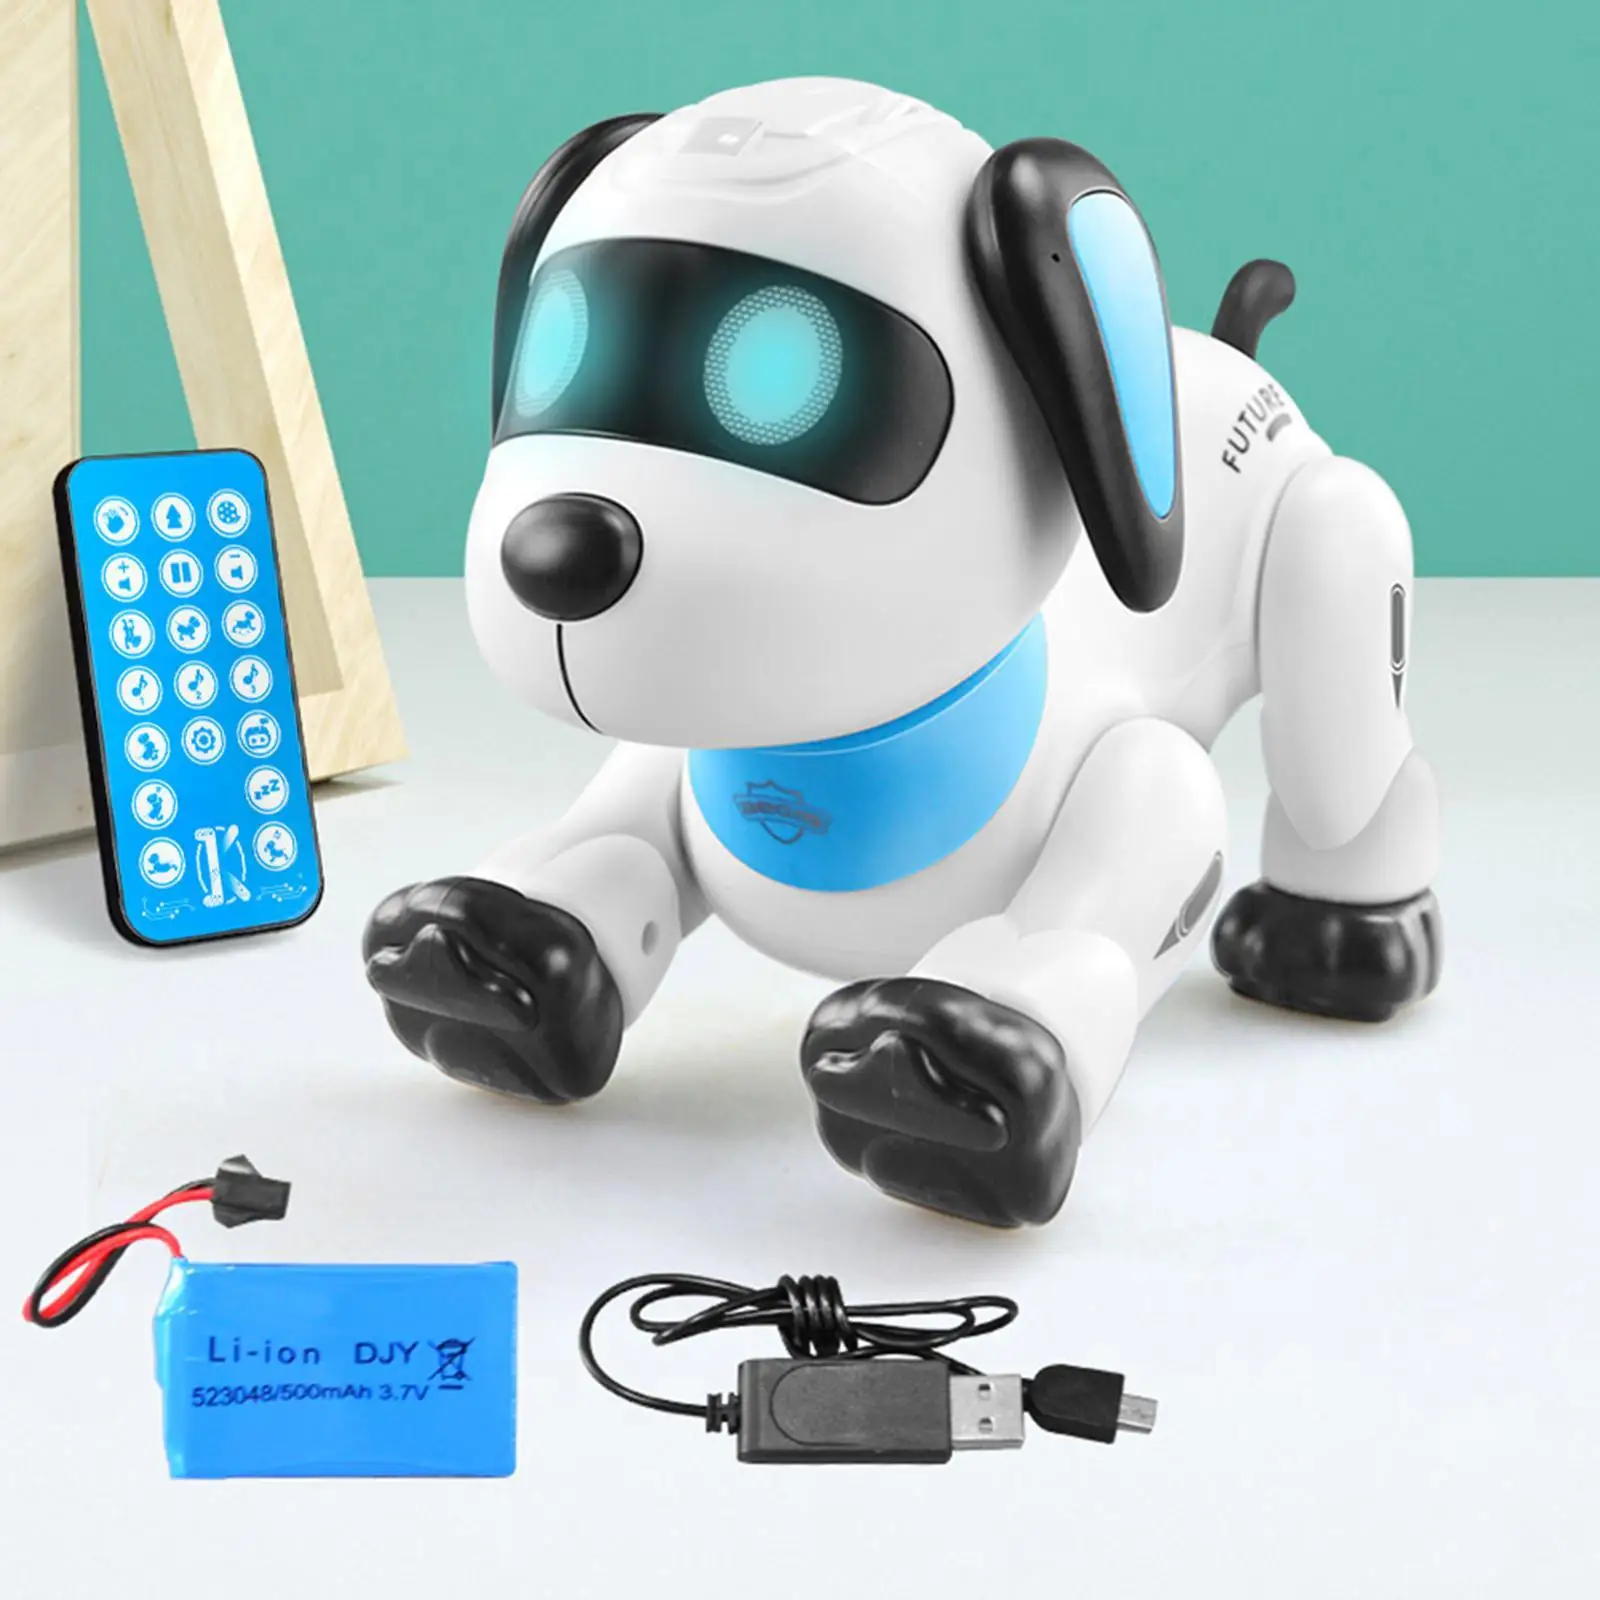 Able gesture sensing rc dancing robot dog with voice app control for boys kids birthday thumb200